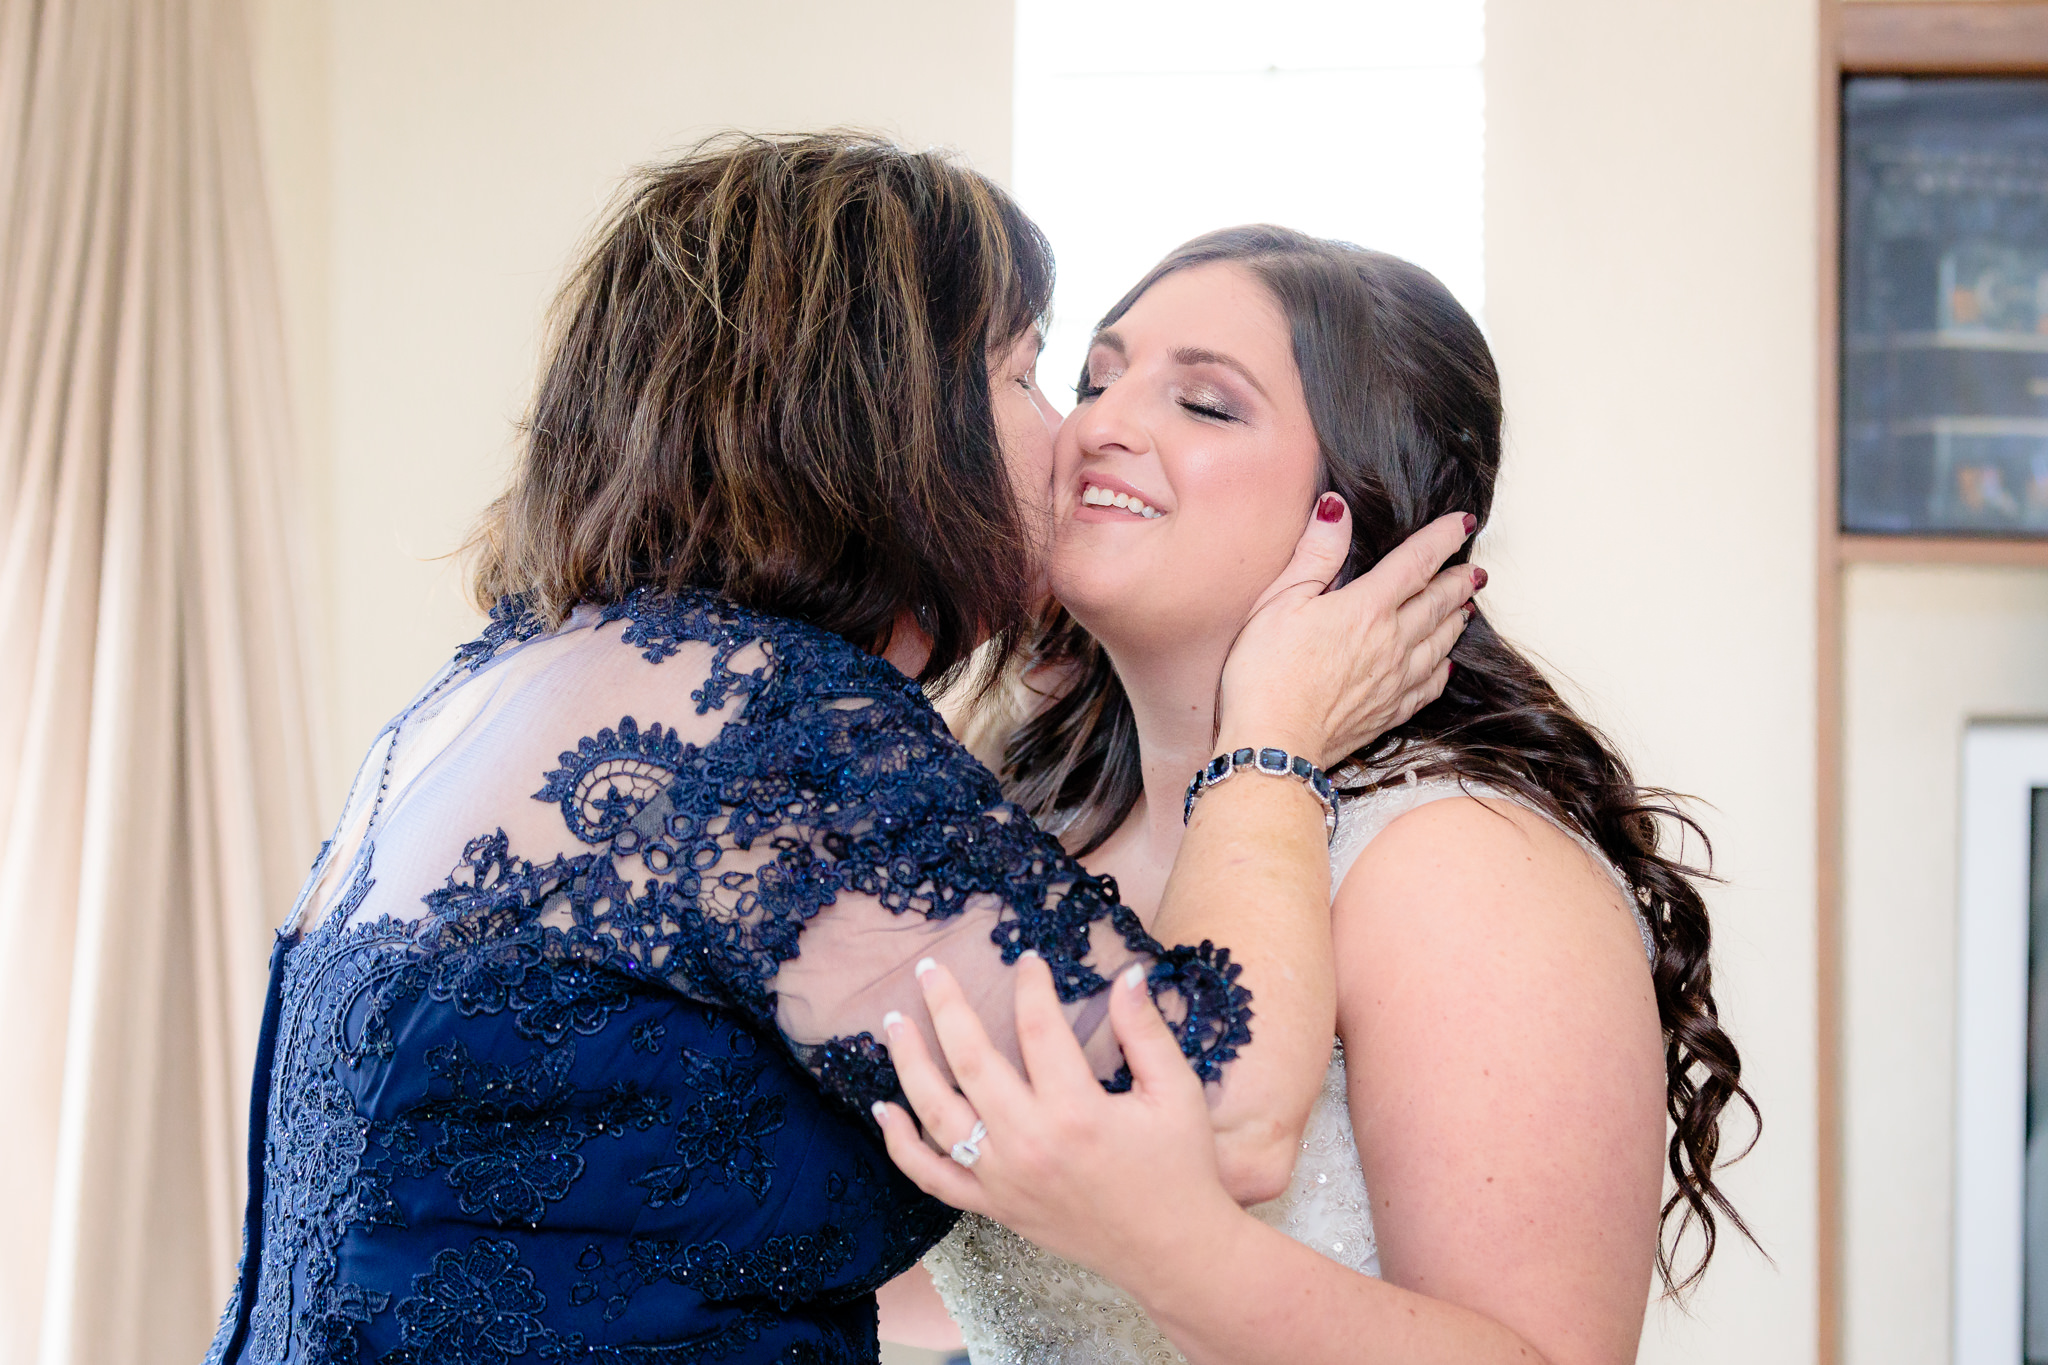 Mother of the bride kisses bride's cheek after seeing her in her wedding dress